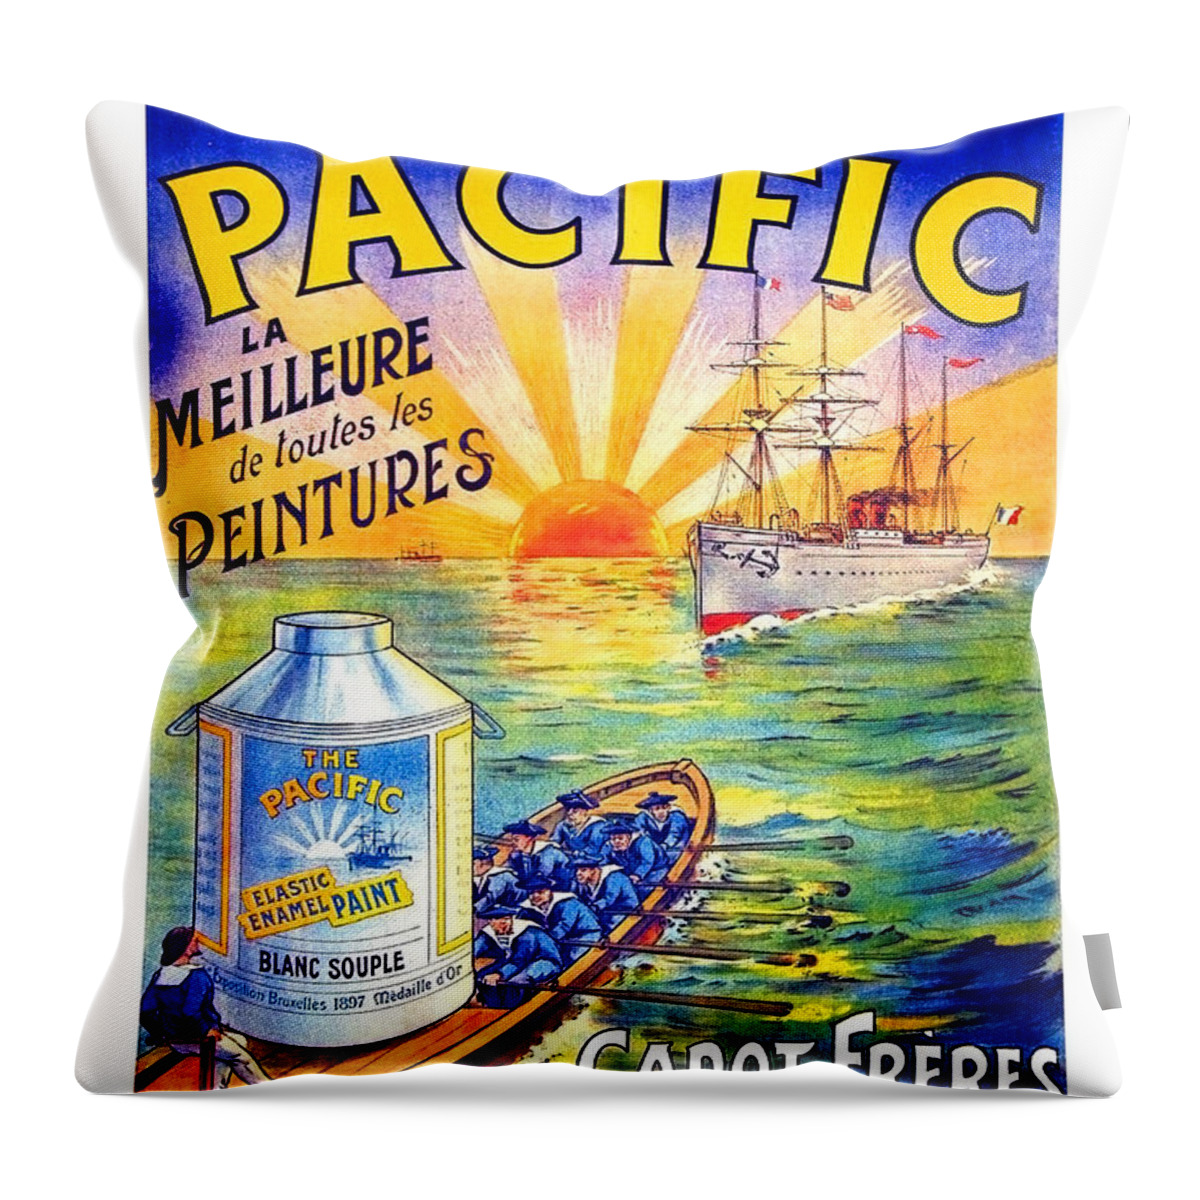 Peinture Throw Pillow featuring the painting Peinture Email Le Pacific vintage advertising poster by Long Shot